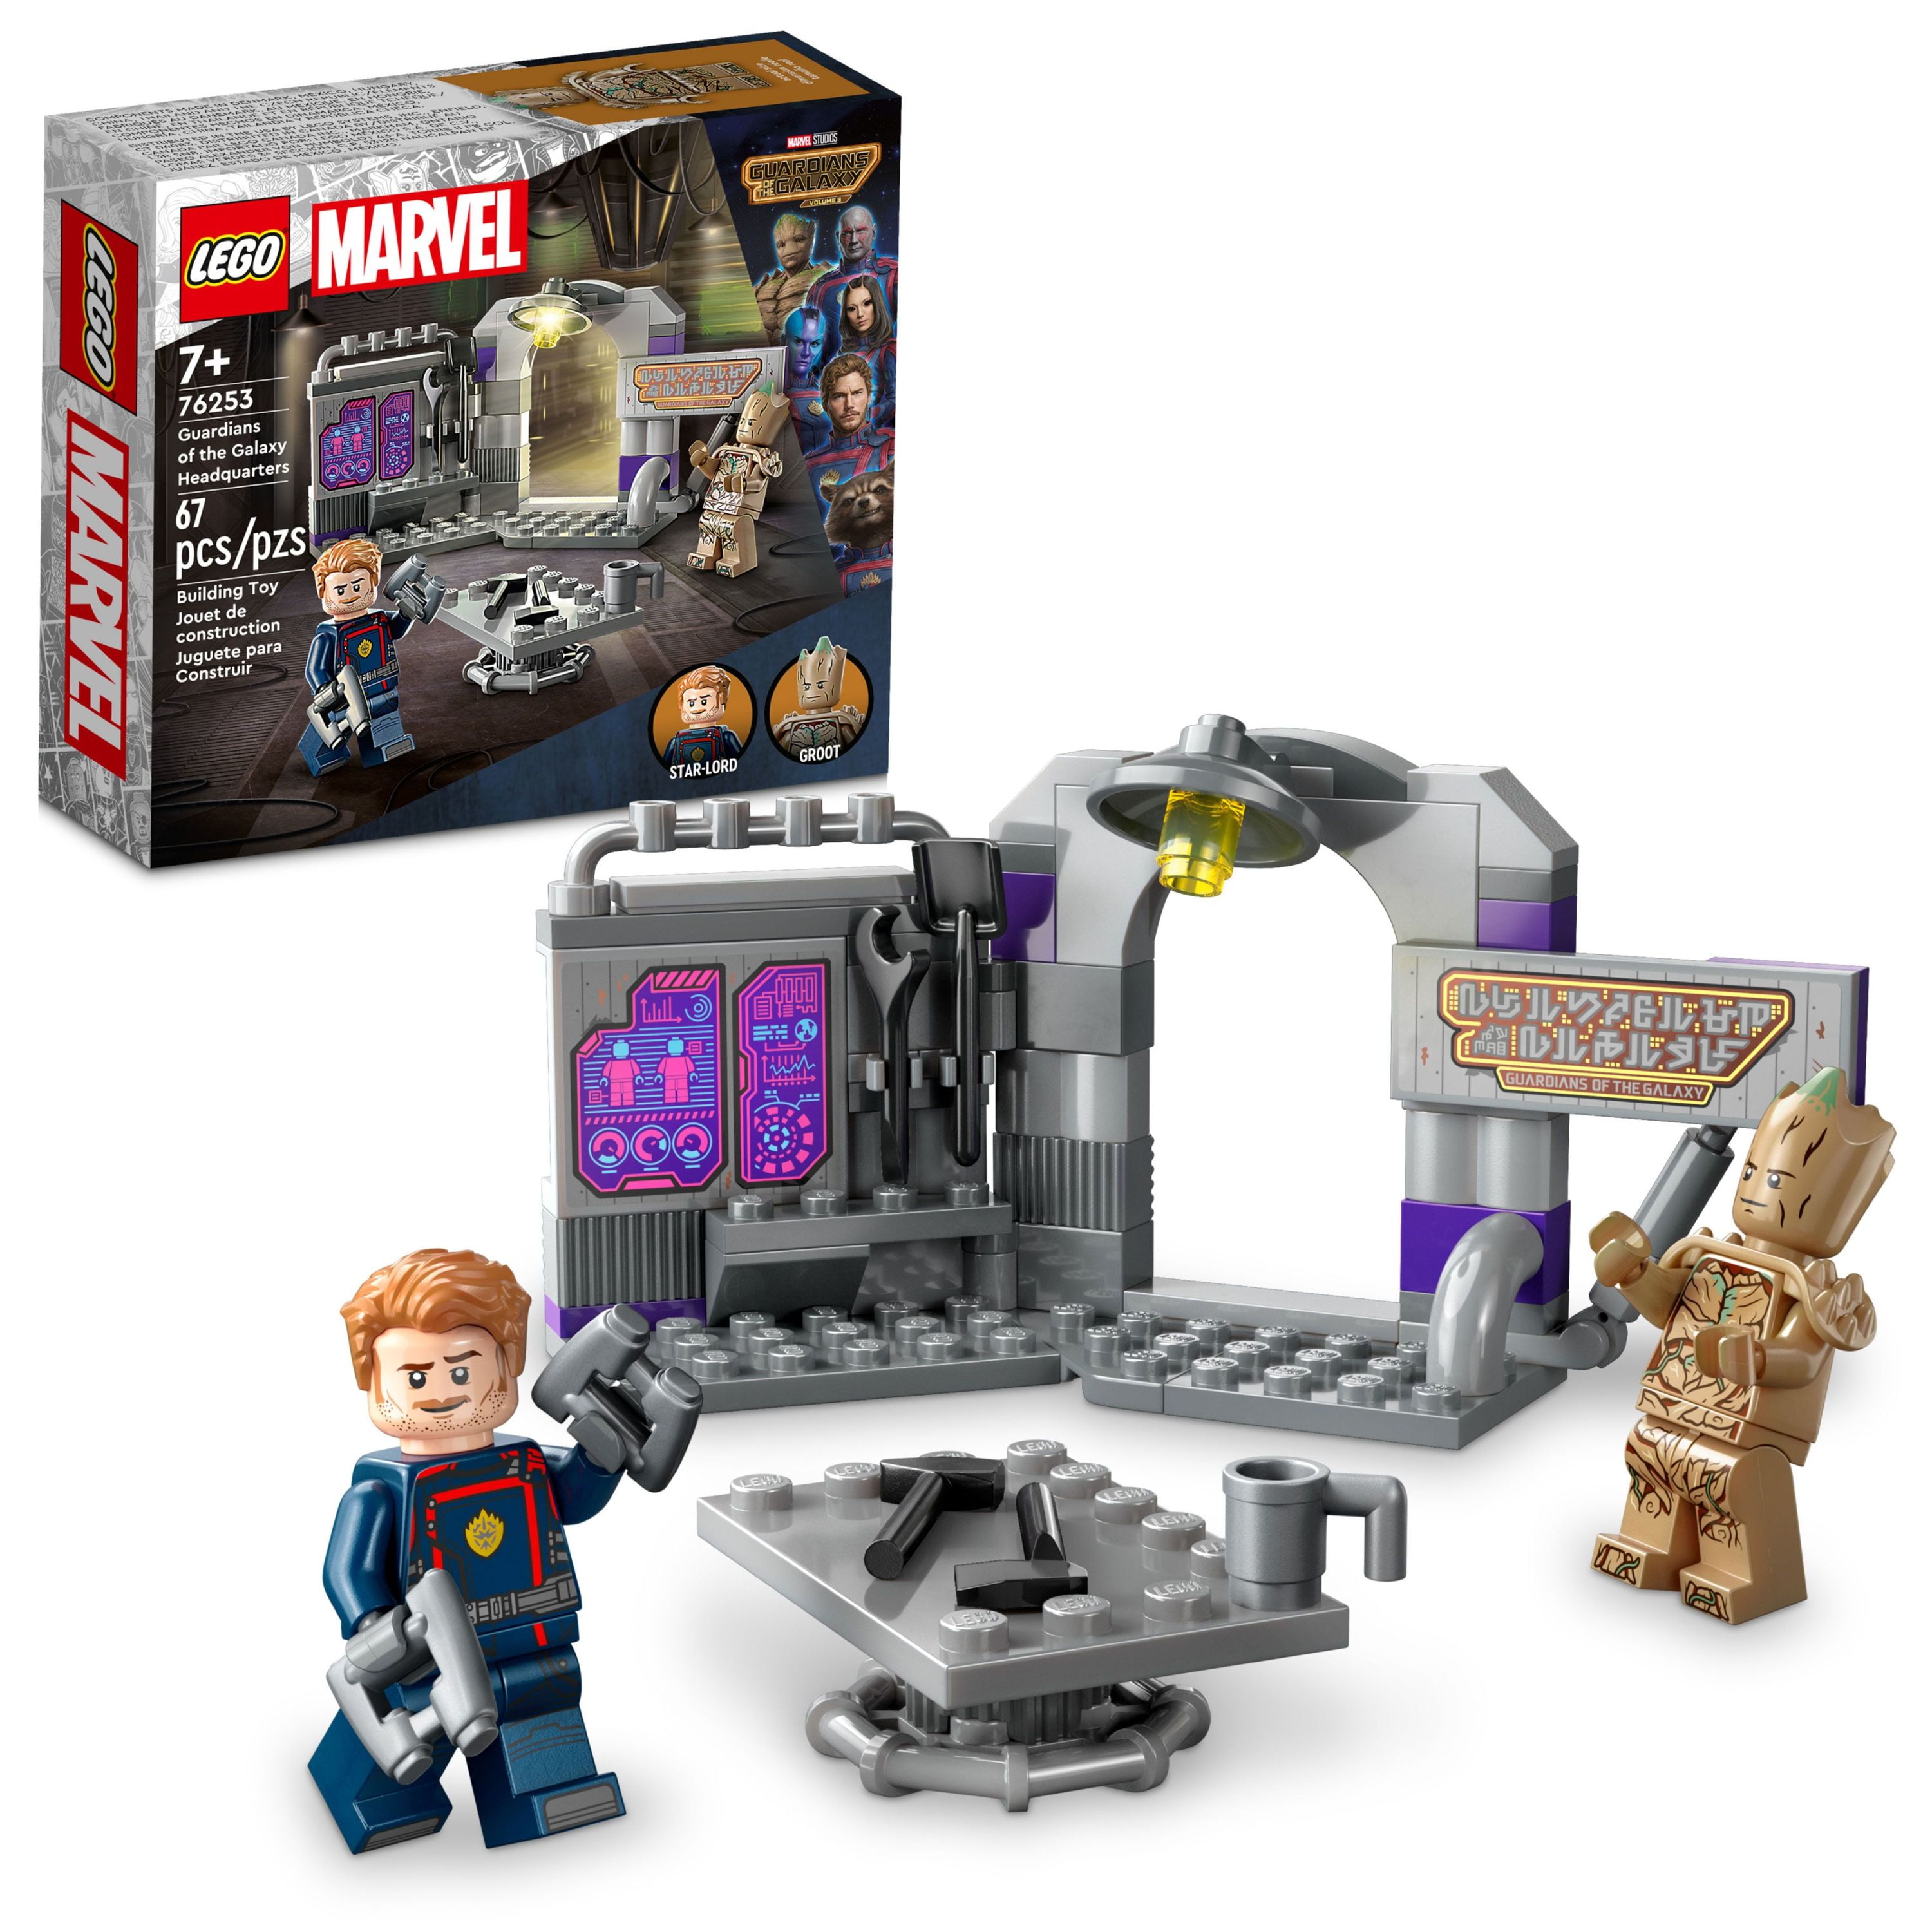 67-Piece LEGO Marvel Guardians of the Galaxy Headquarters (76253) $6 + Free S&H w/ Walmart+ or $35+